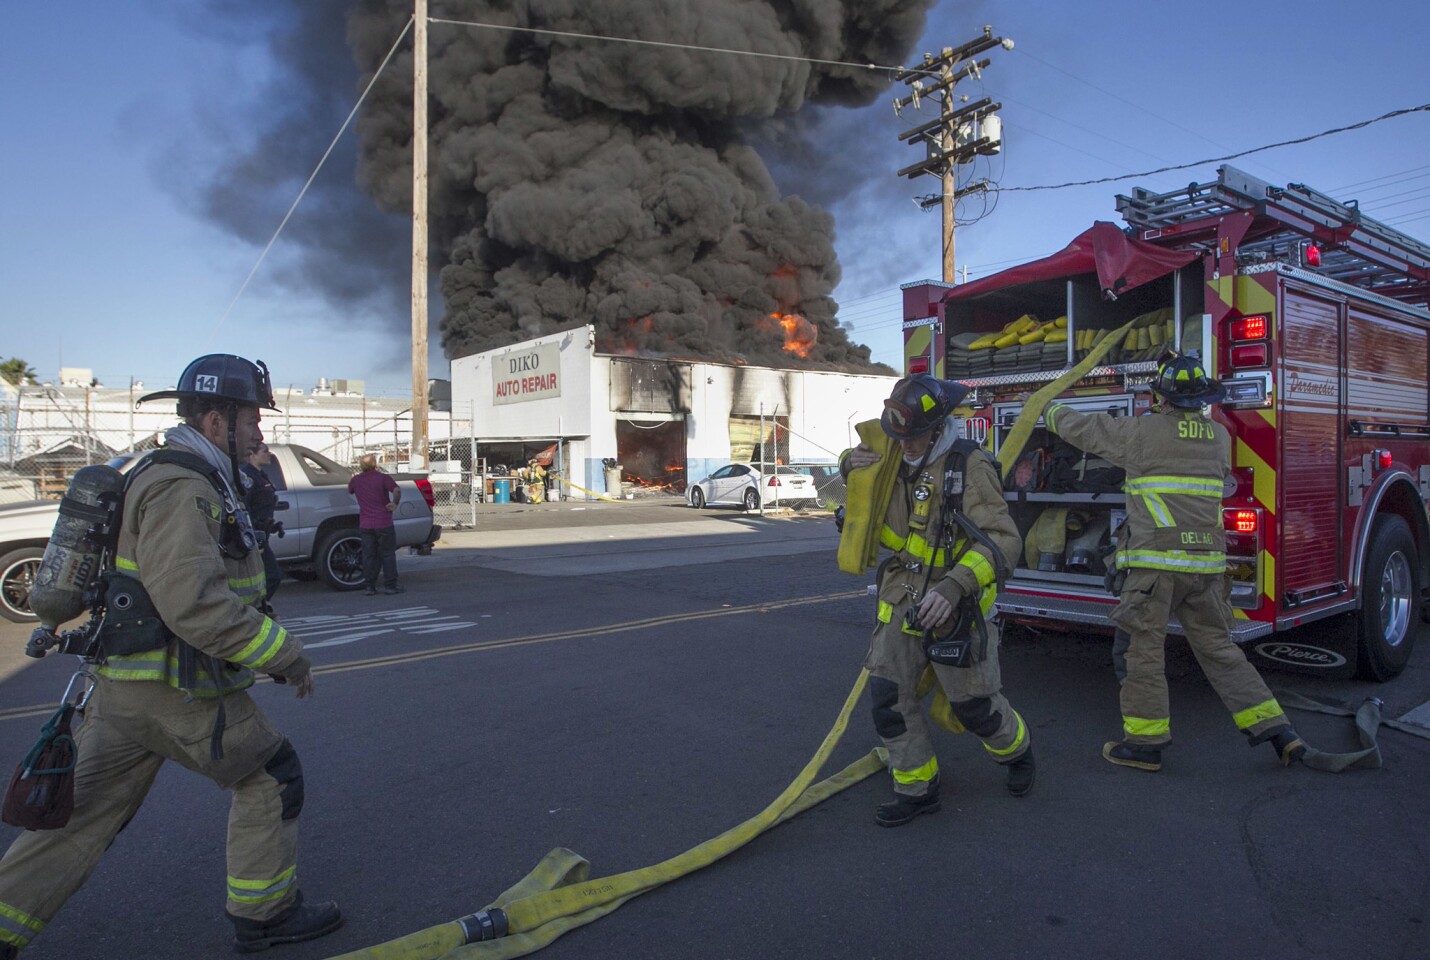 First arriving units connect to a hydrant across the street at a two-alarm fire that destroyed two businesses on Pacific Highway at Wright street Tuesday morning.